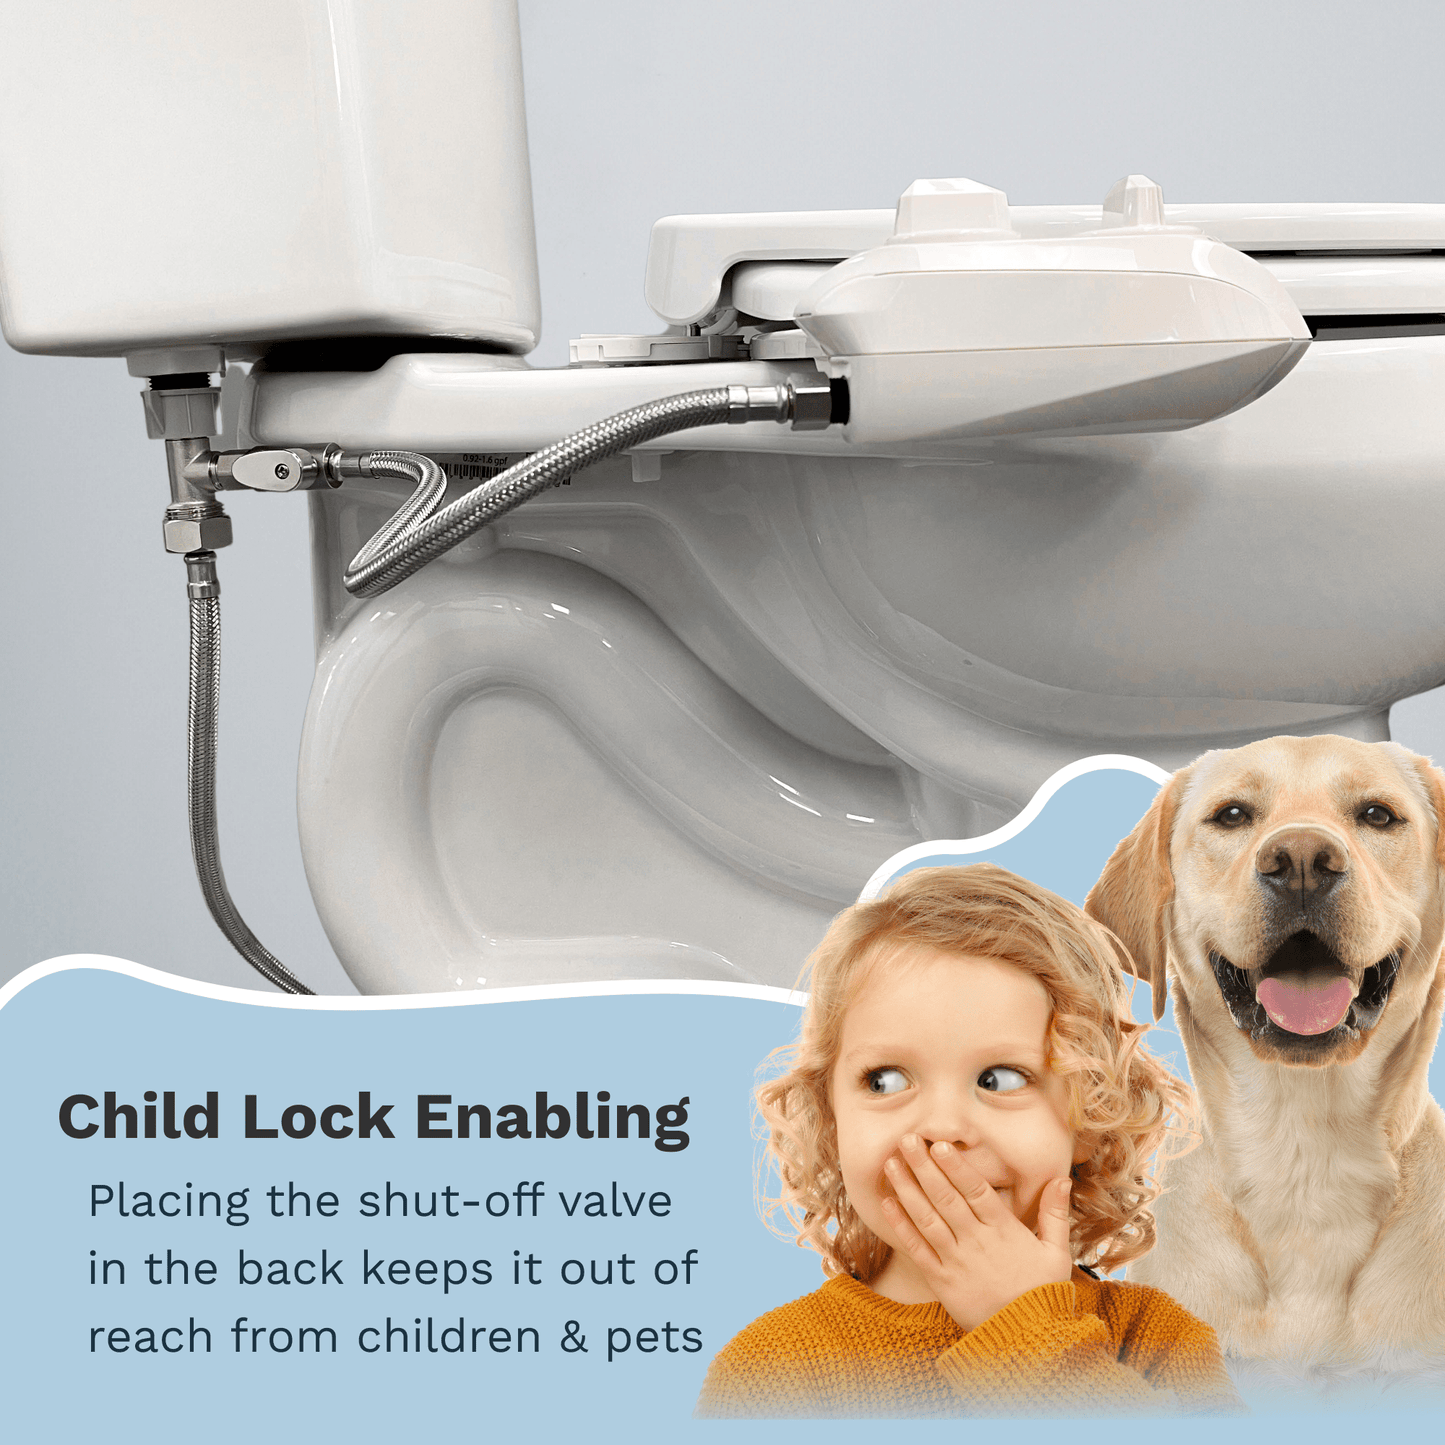 Cold Water Shut-Off Hose placed in child and pet proof setup